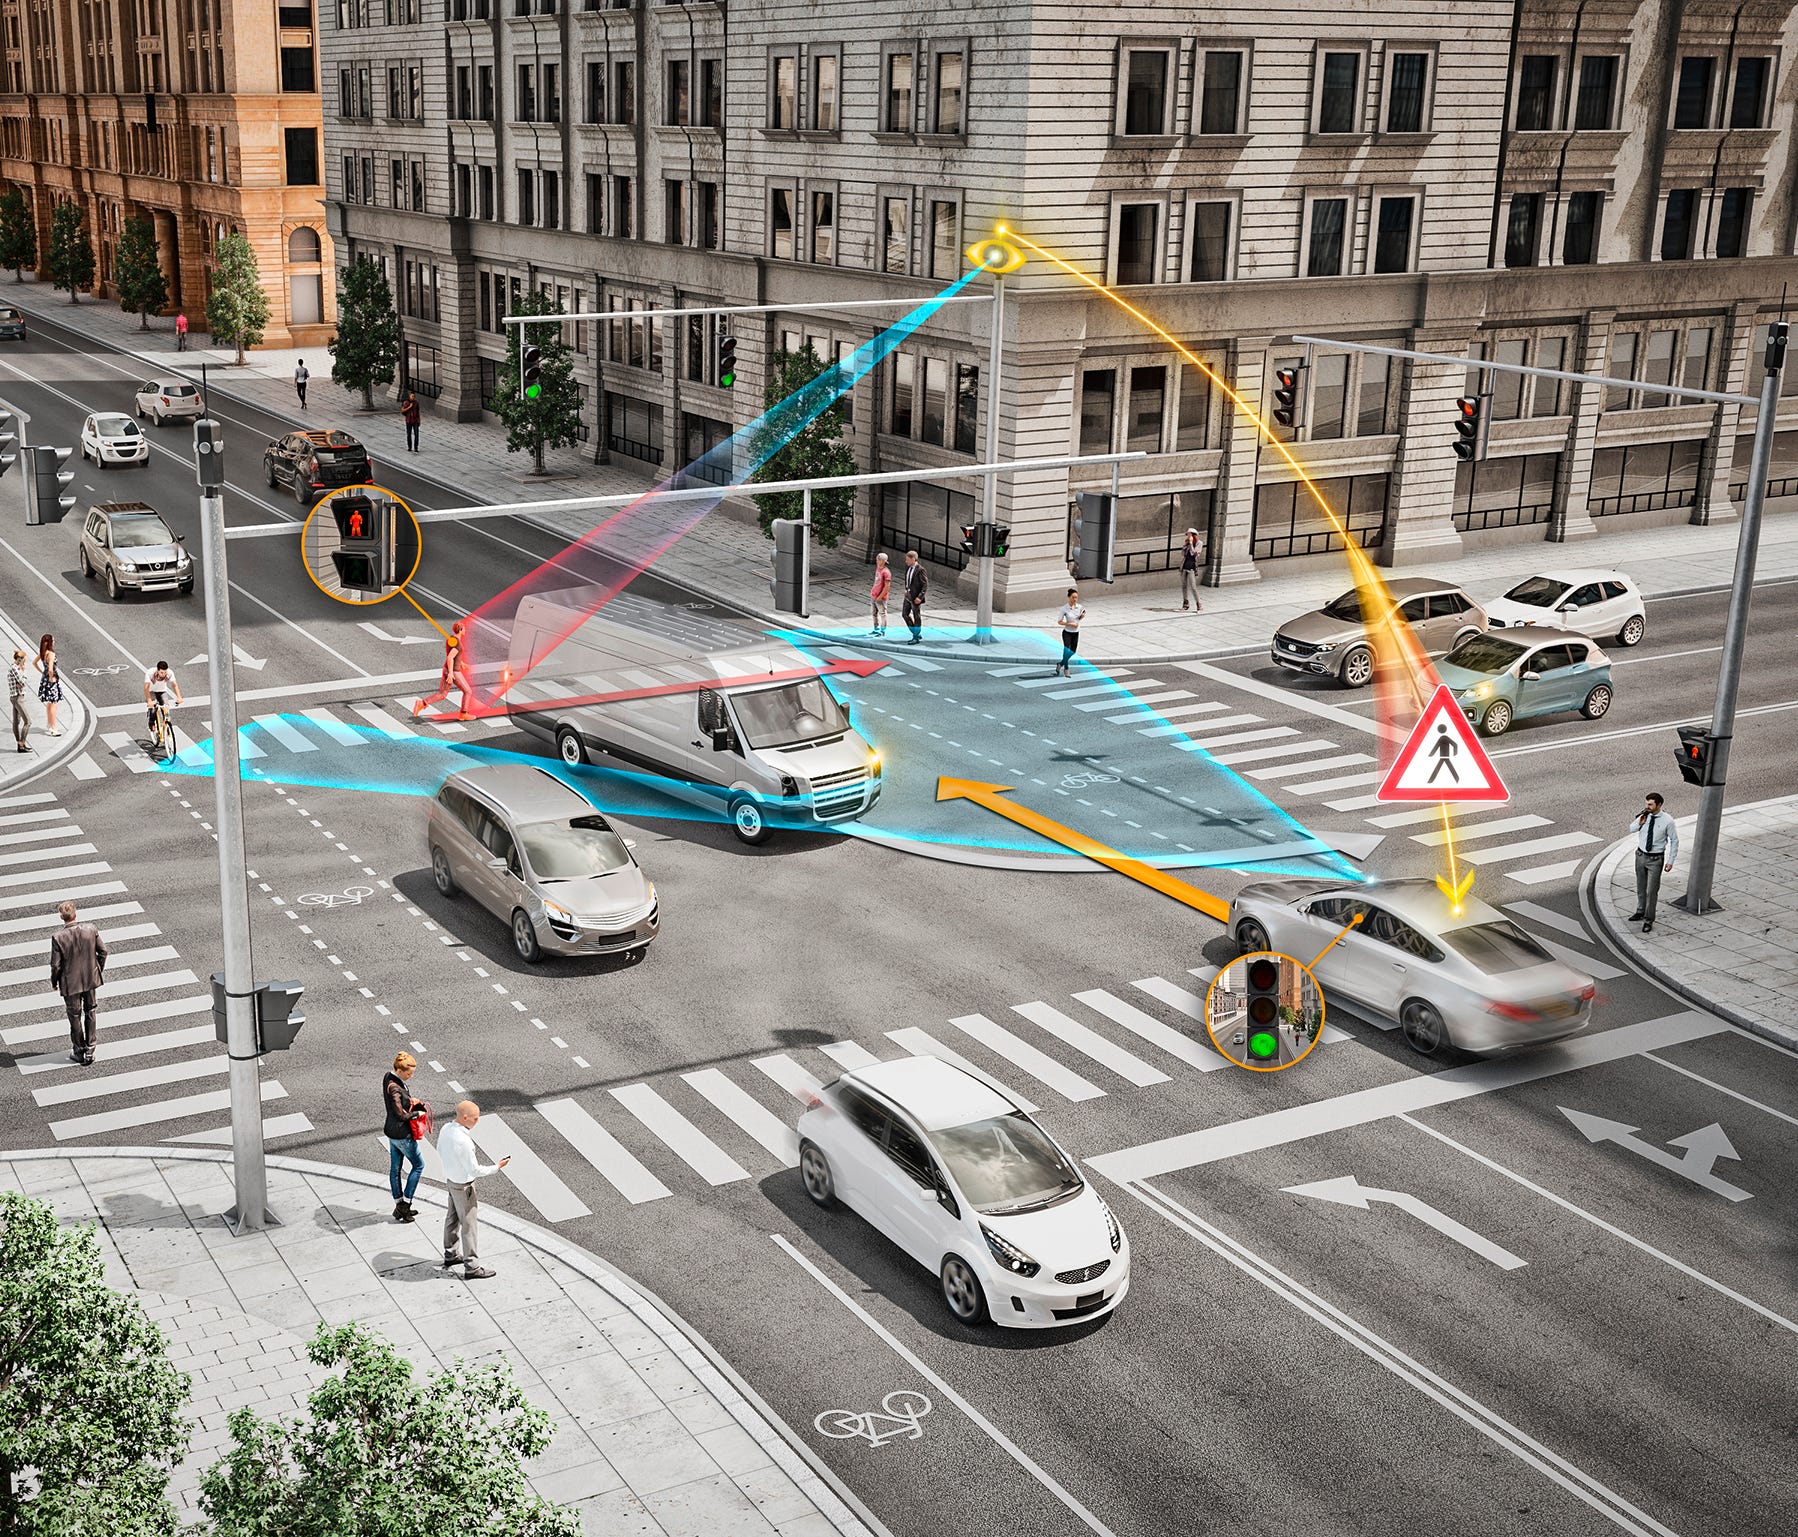 A system designed by auto supplier Continental enables wireless vehicle-to-infrastructure communication, allowing an above-the-intersection suite of sensors to detect pedestrians and alert oncoming vehicles to avoid them. The system will be tested in